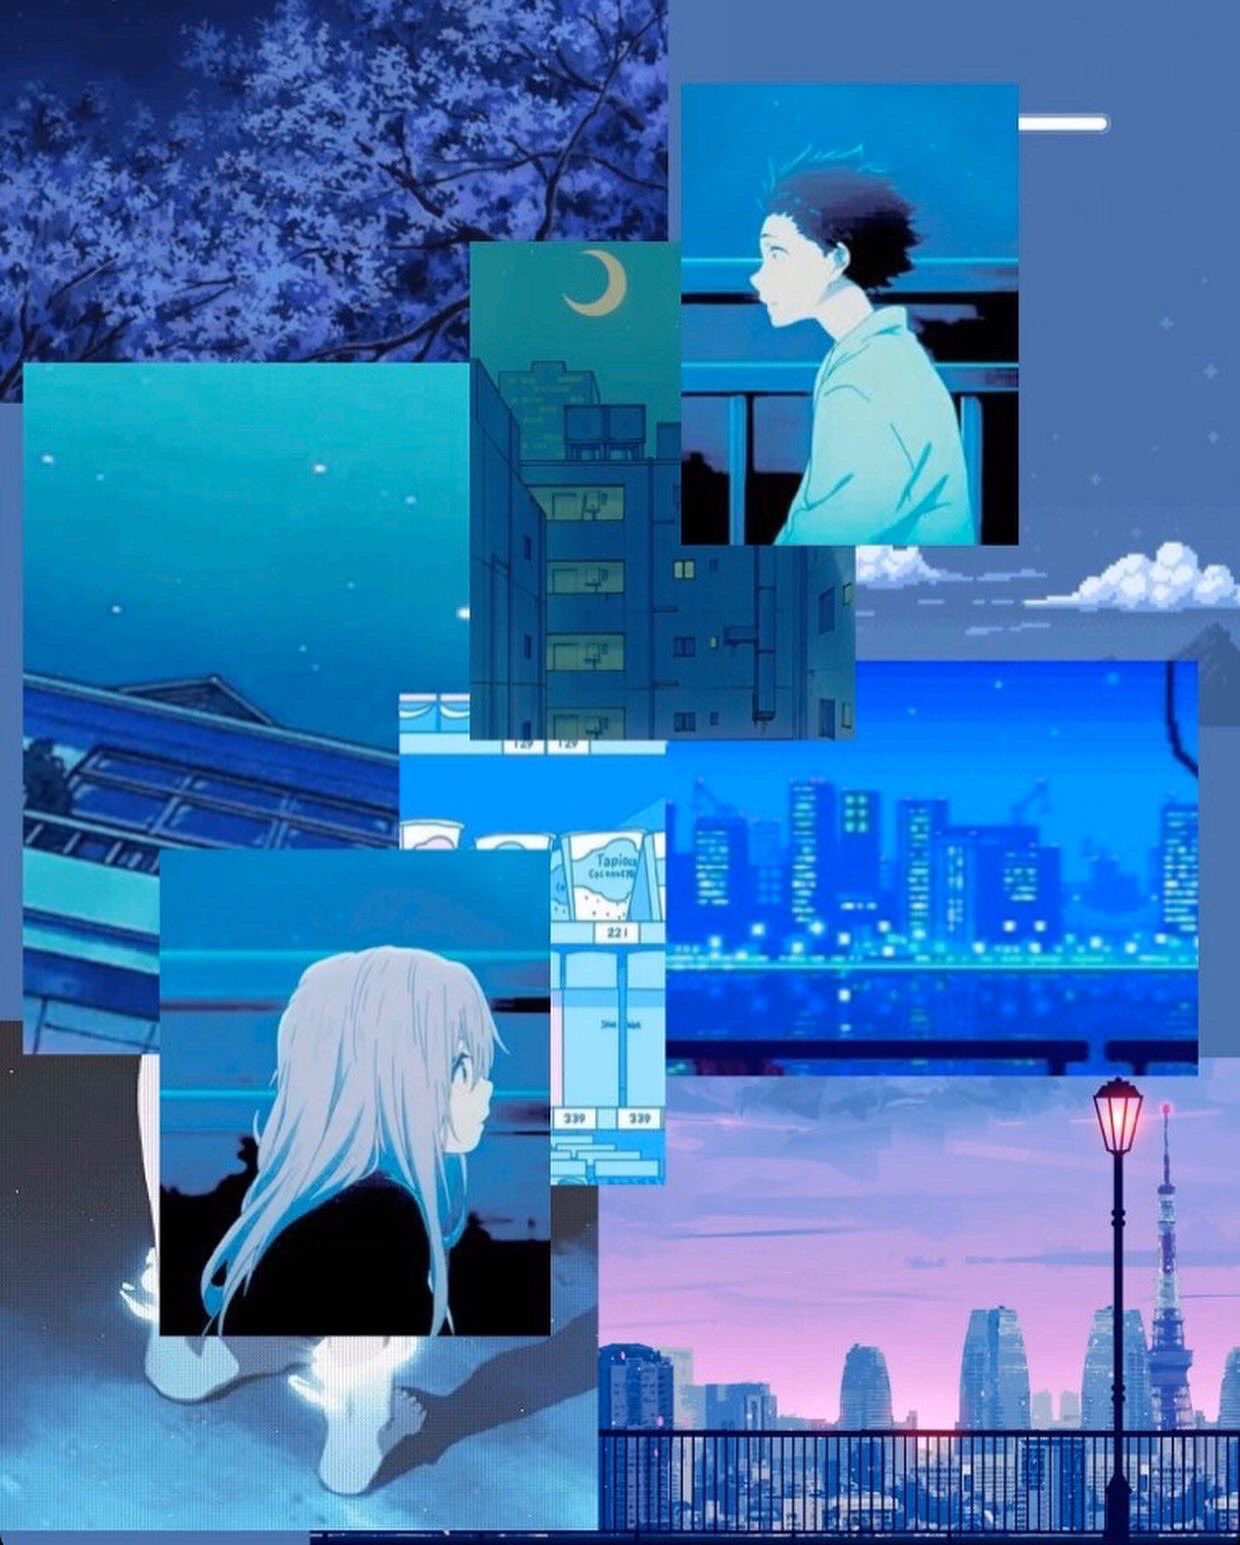 Order of the weebs on i made a silent voice aesthetic wallpaperâï aesthetic anime blue httpstcoehxayngsco